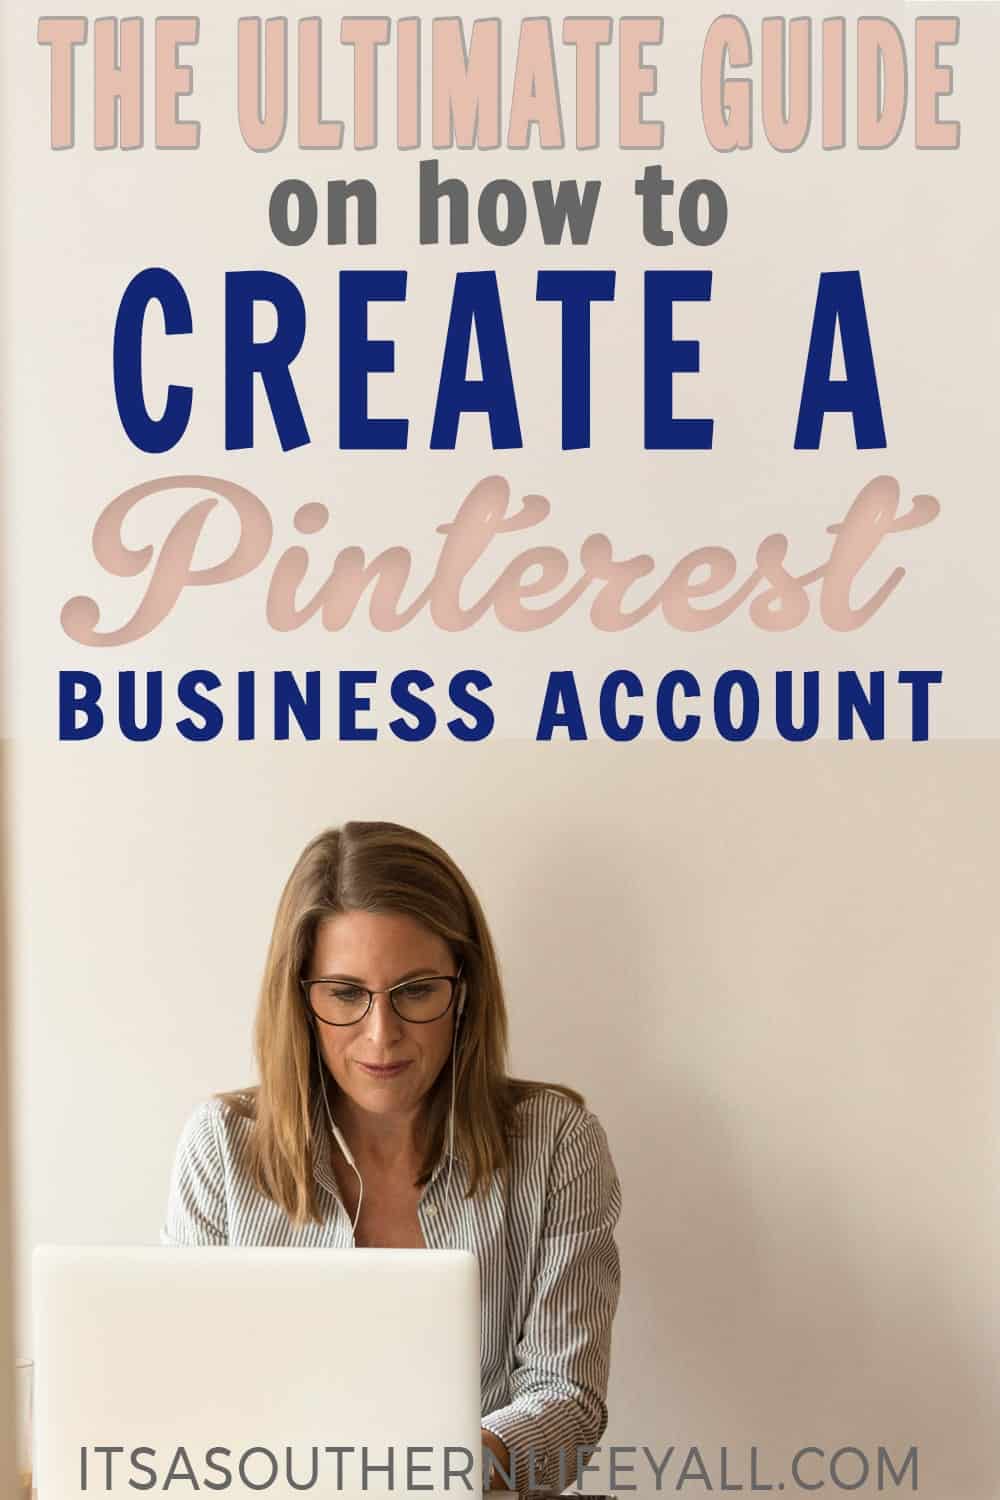 Woman typing on laptop with the ultimate guide on how to create a Pinterest business account text overlay.